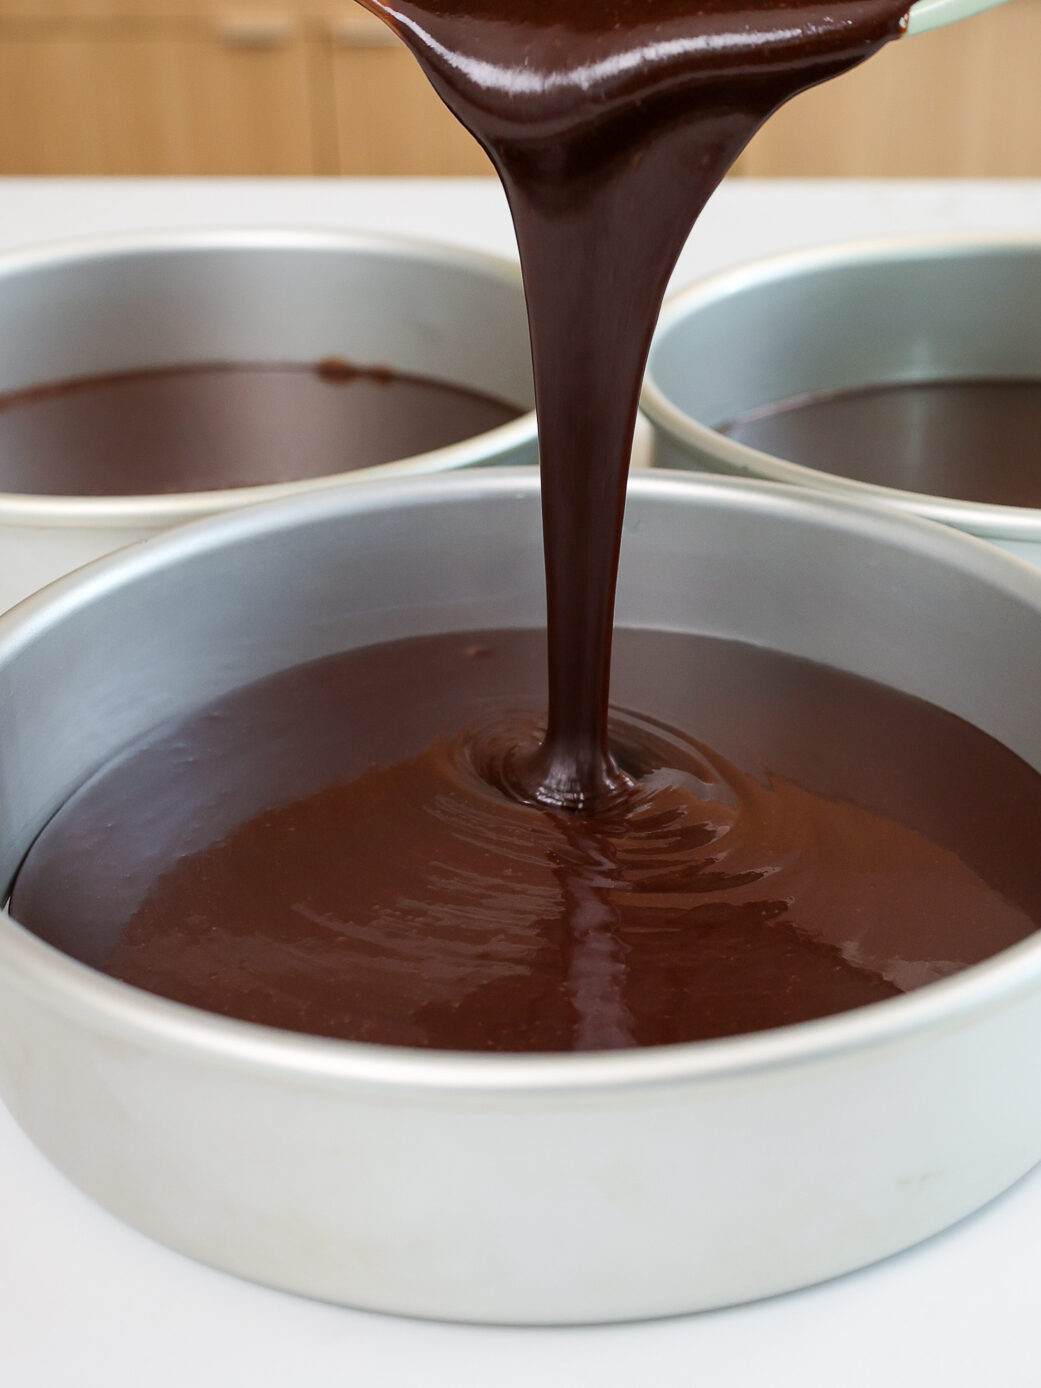 image of dark chocolate cake batter being poured into cake pans